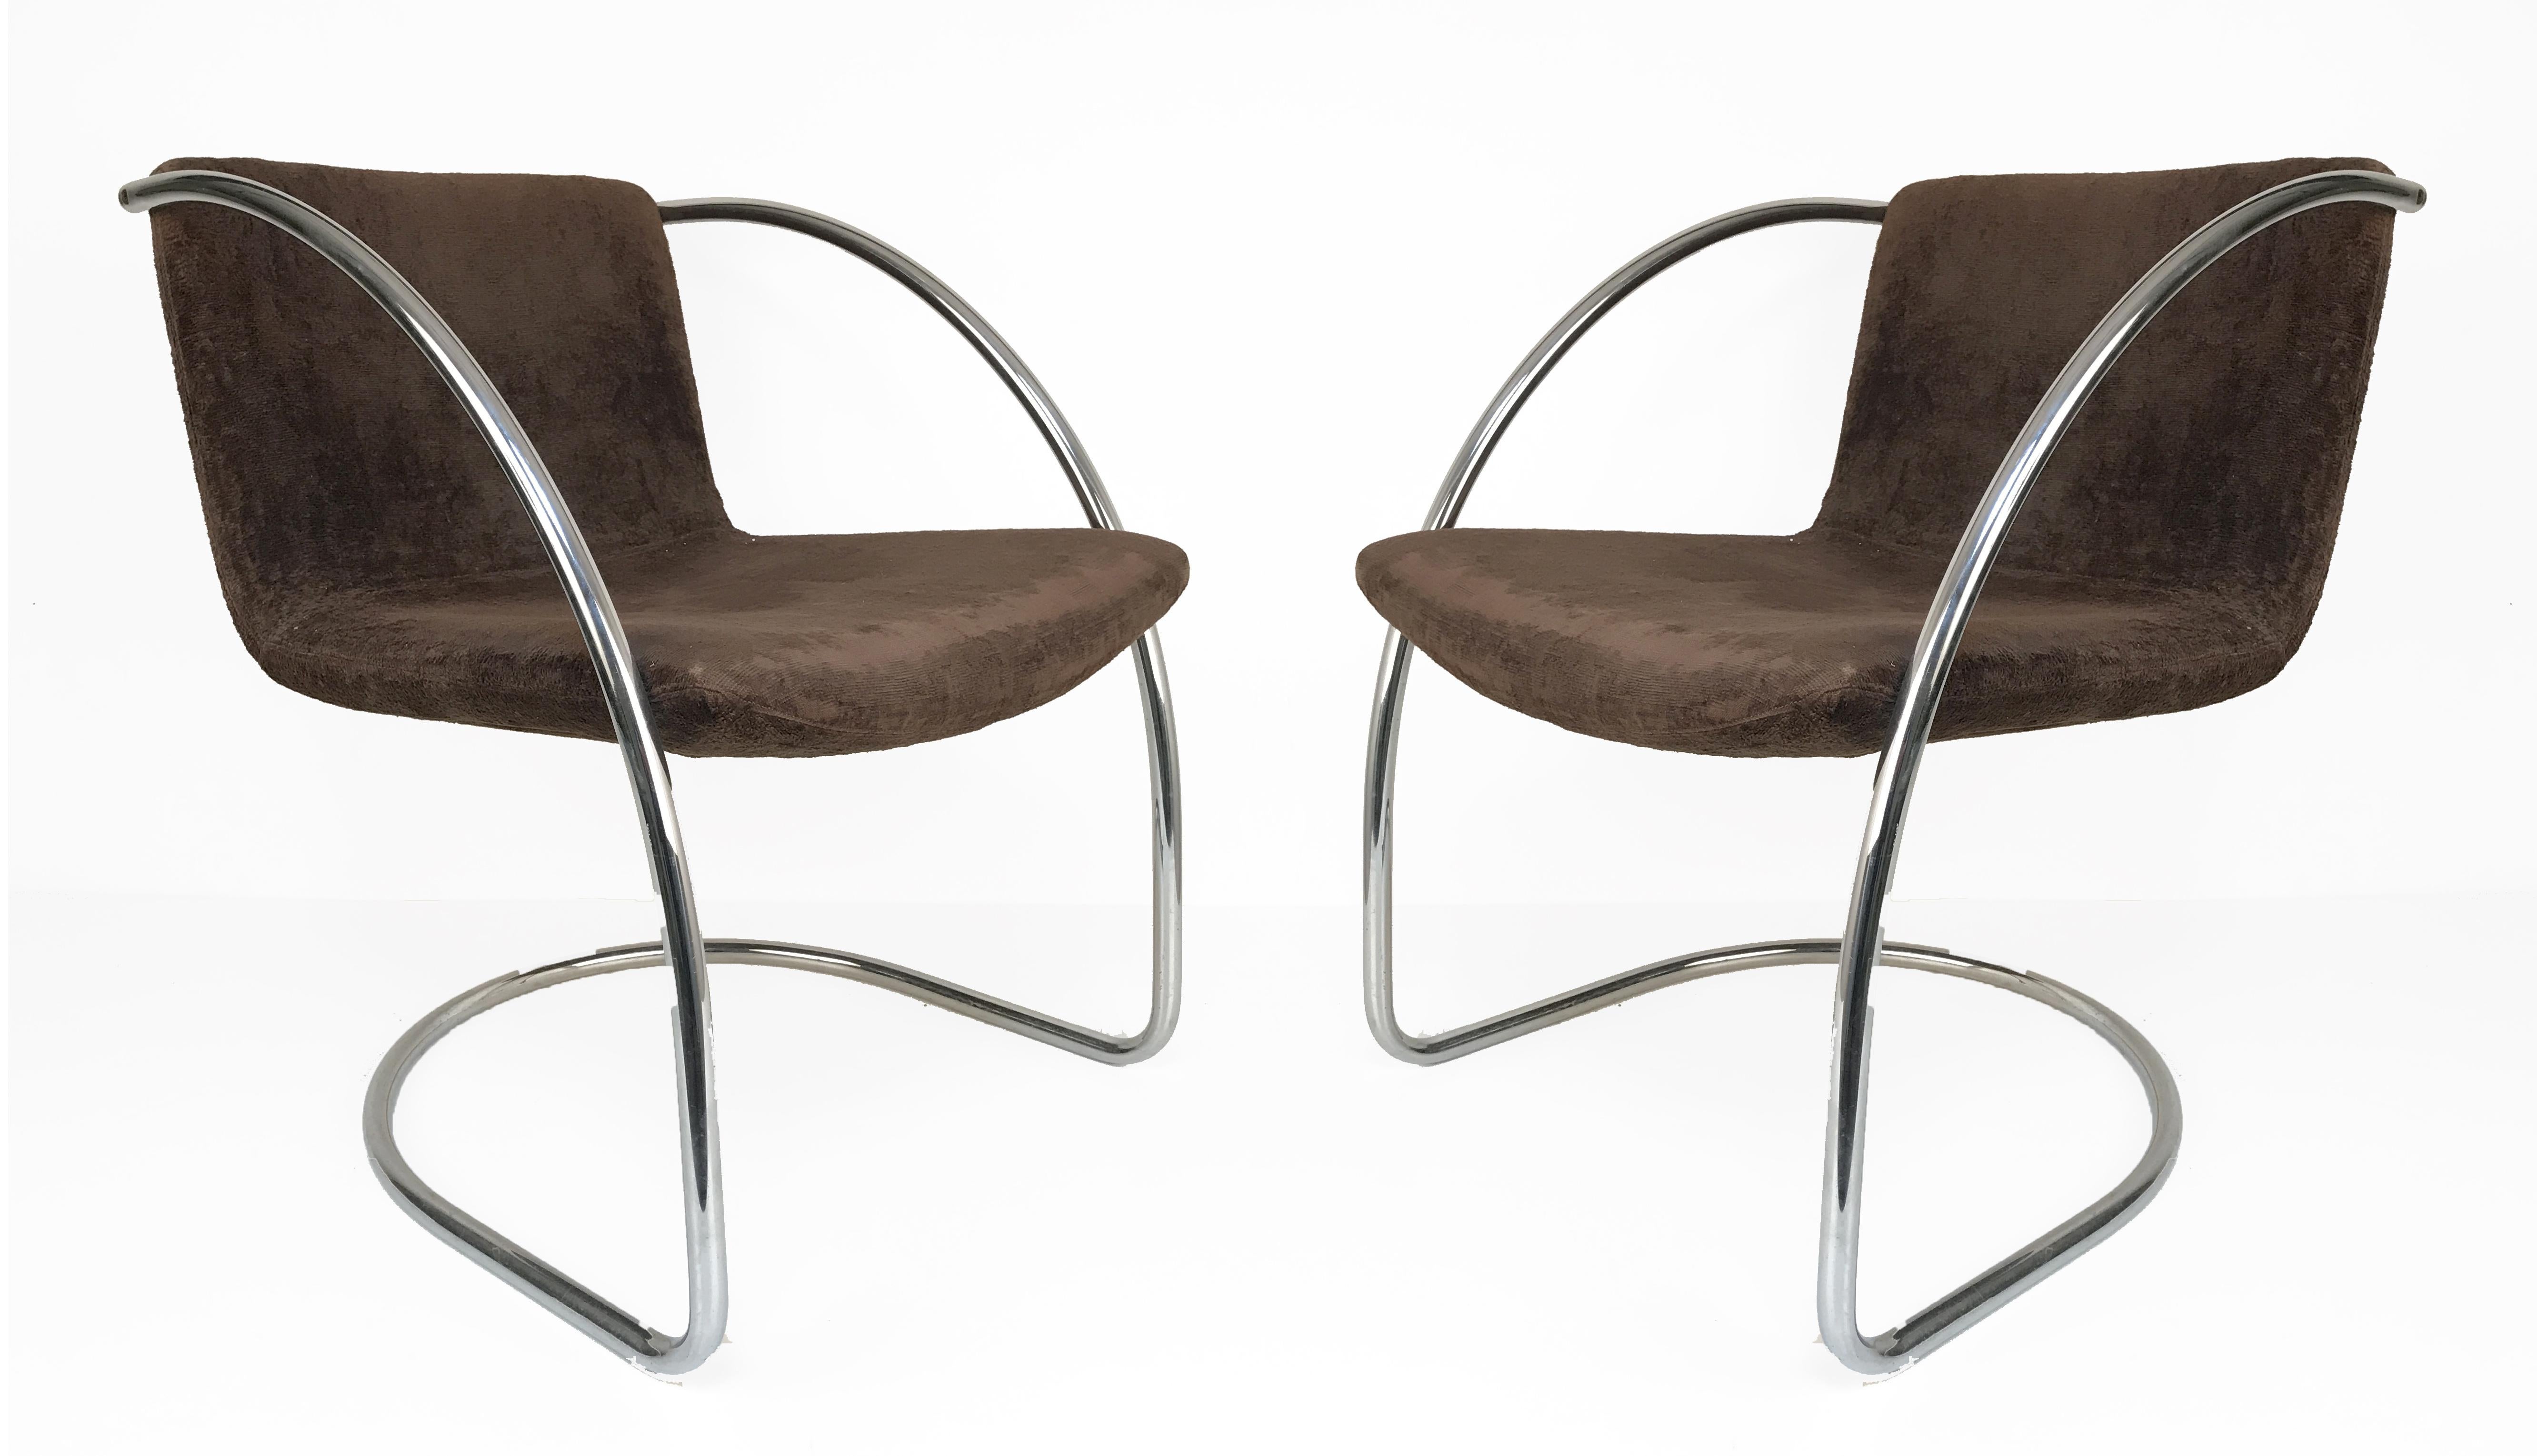 Wonderful midcentury armchairs with tubular steel structure and seats. The 